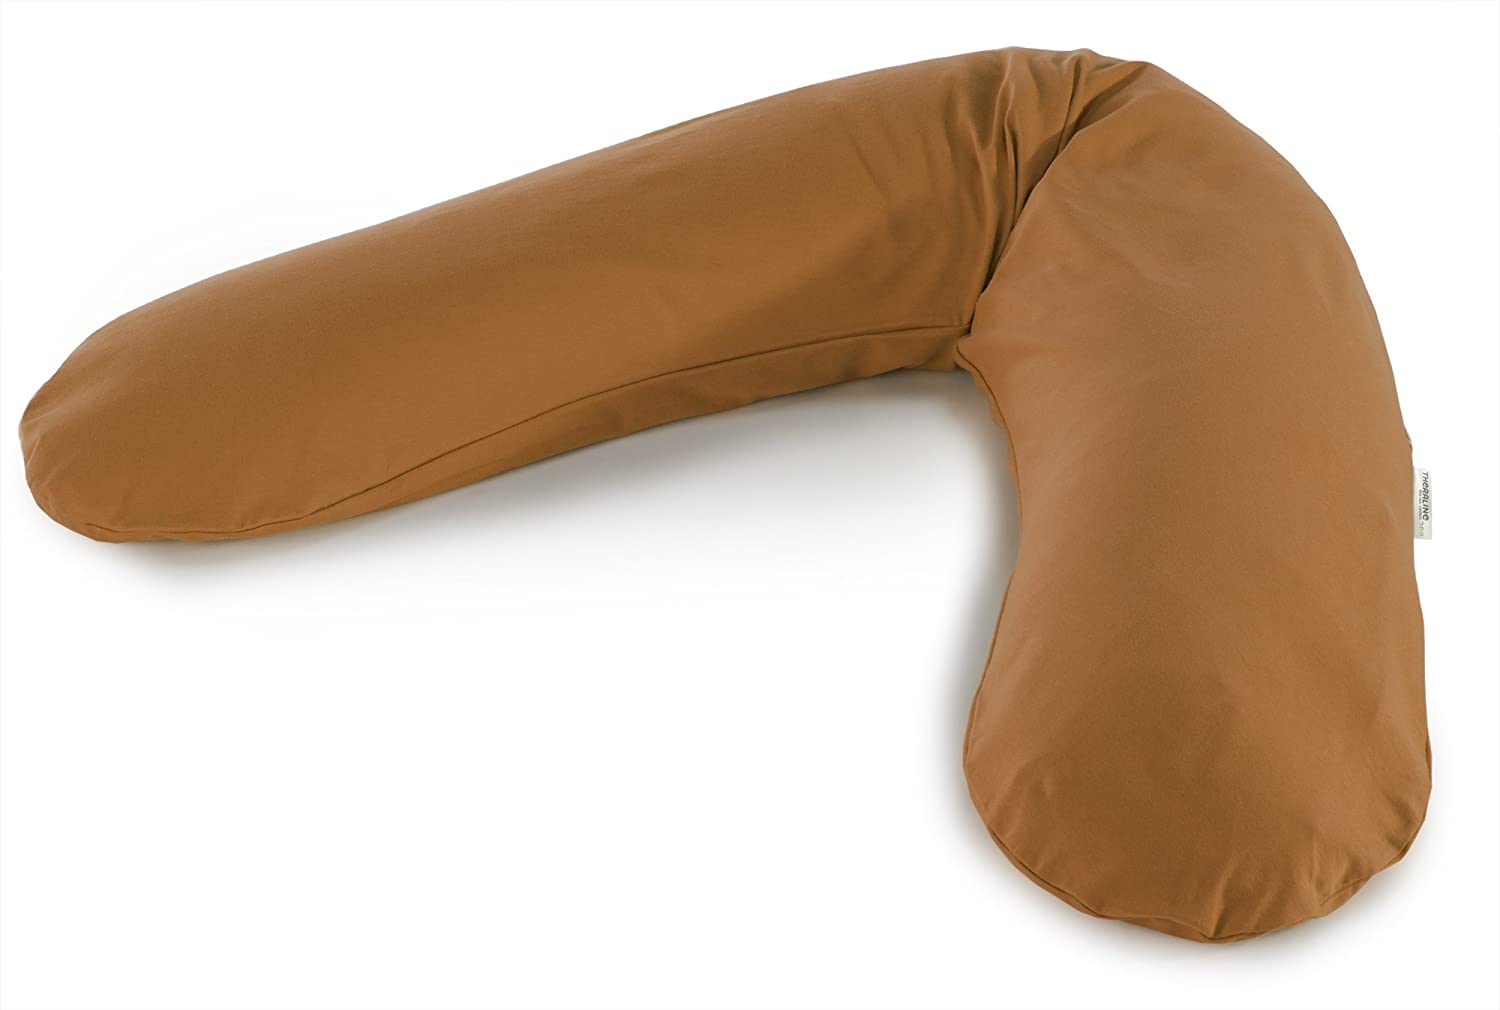 Replacement Cover For The Original Theraline Pregnancy And Nursing Pillow, 100% Cotton. Uni ochre